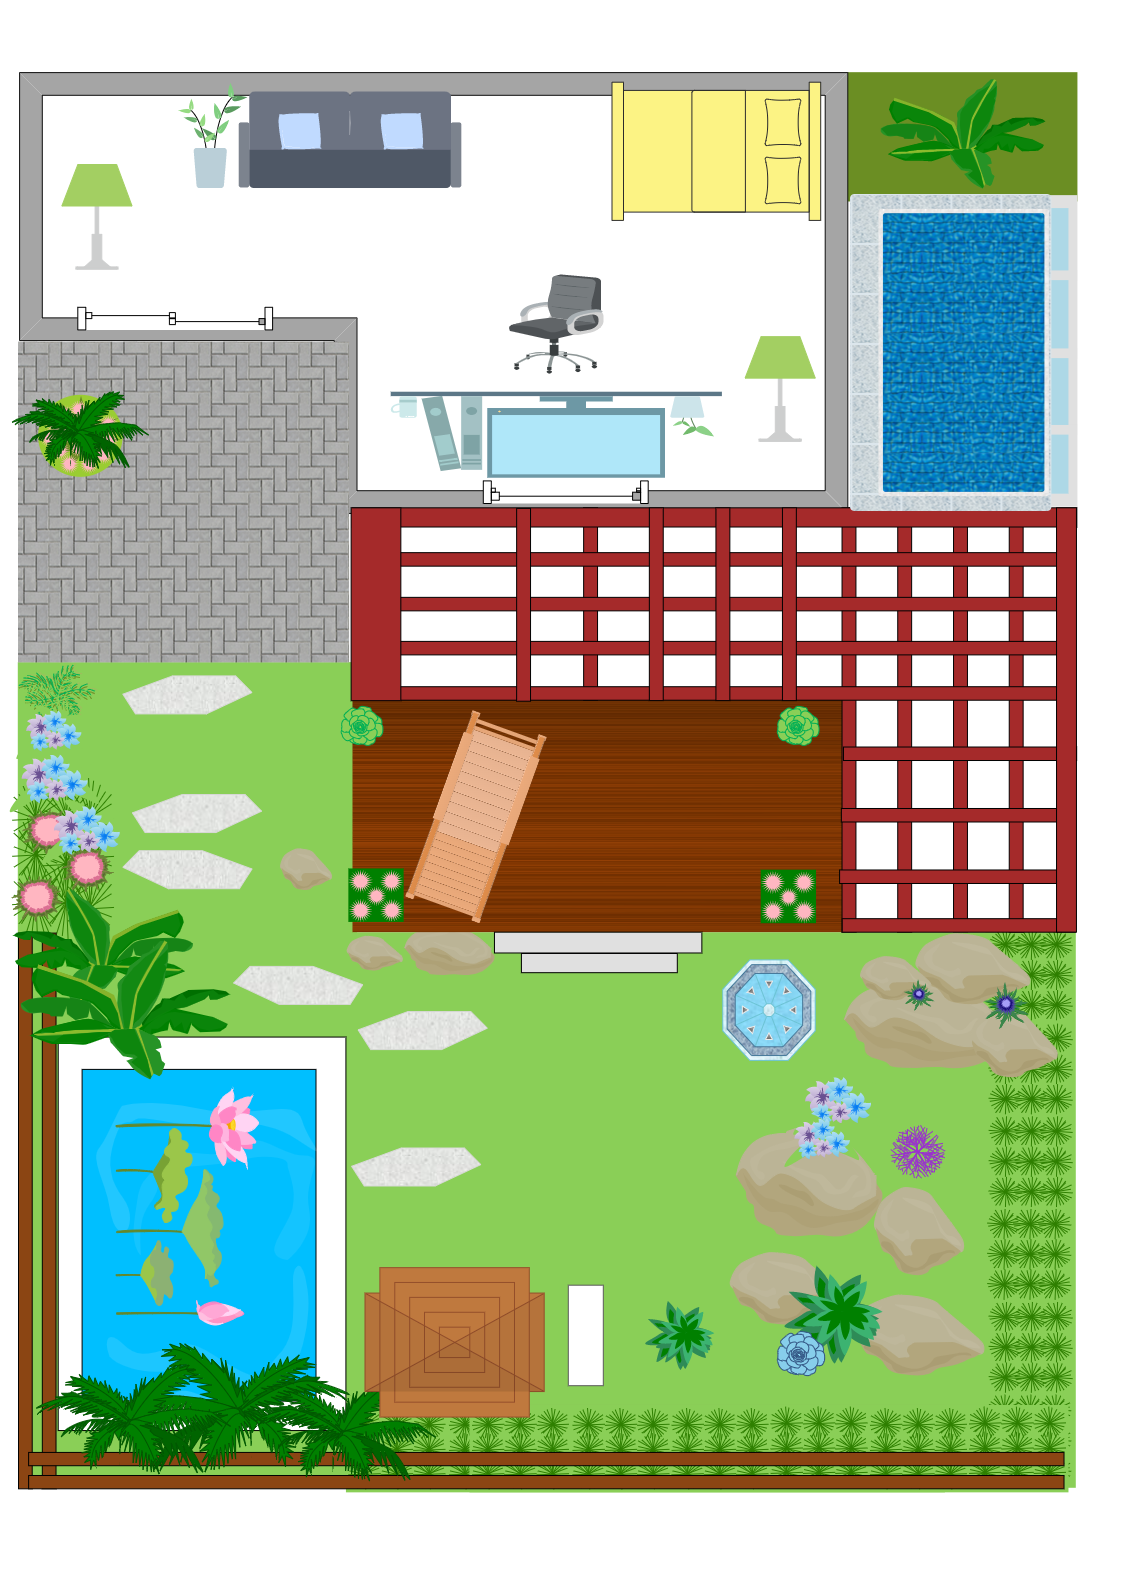 Lanscape Design of Garden and Office